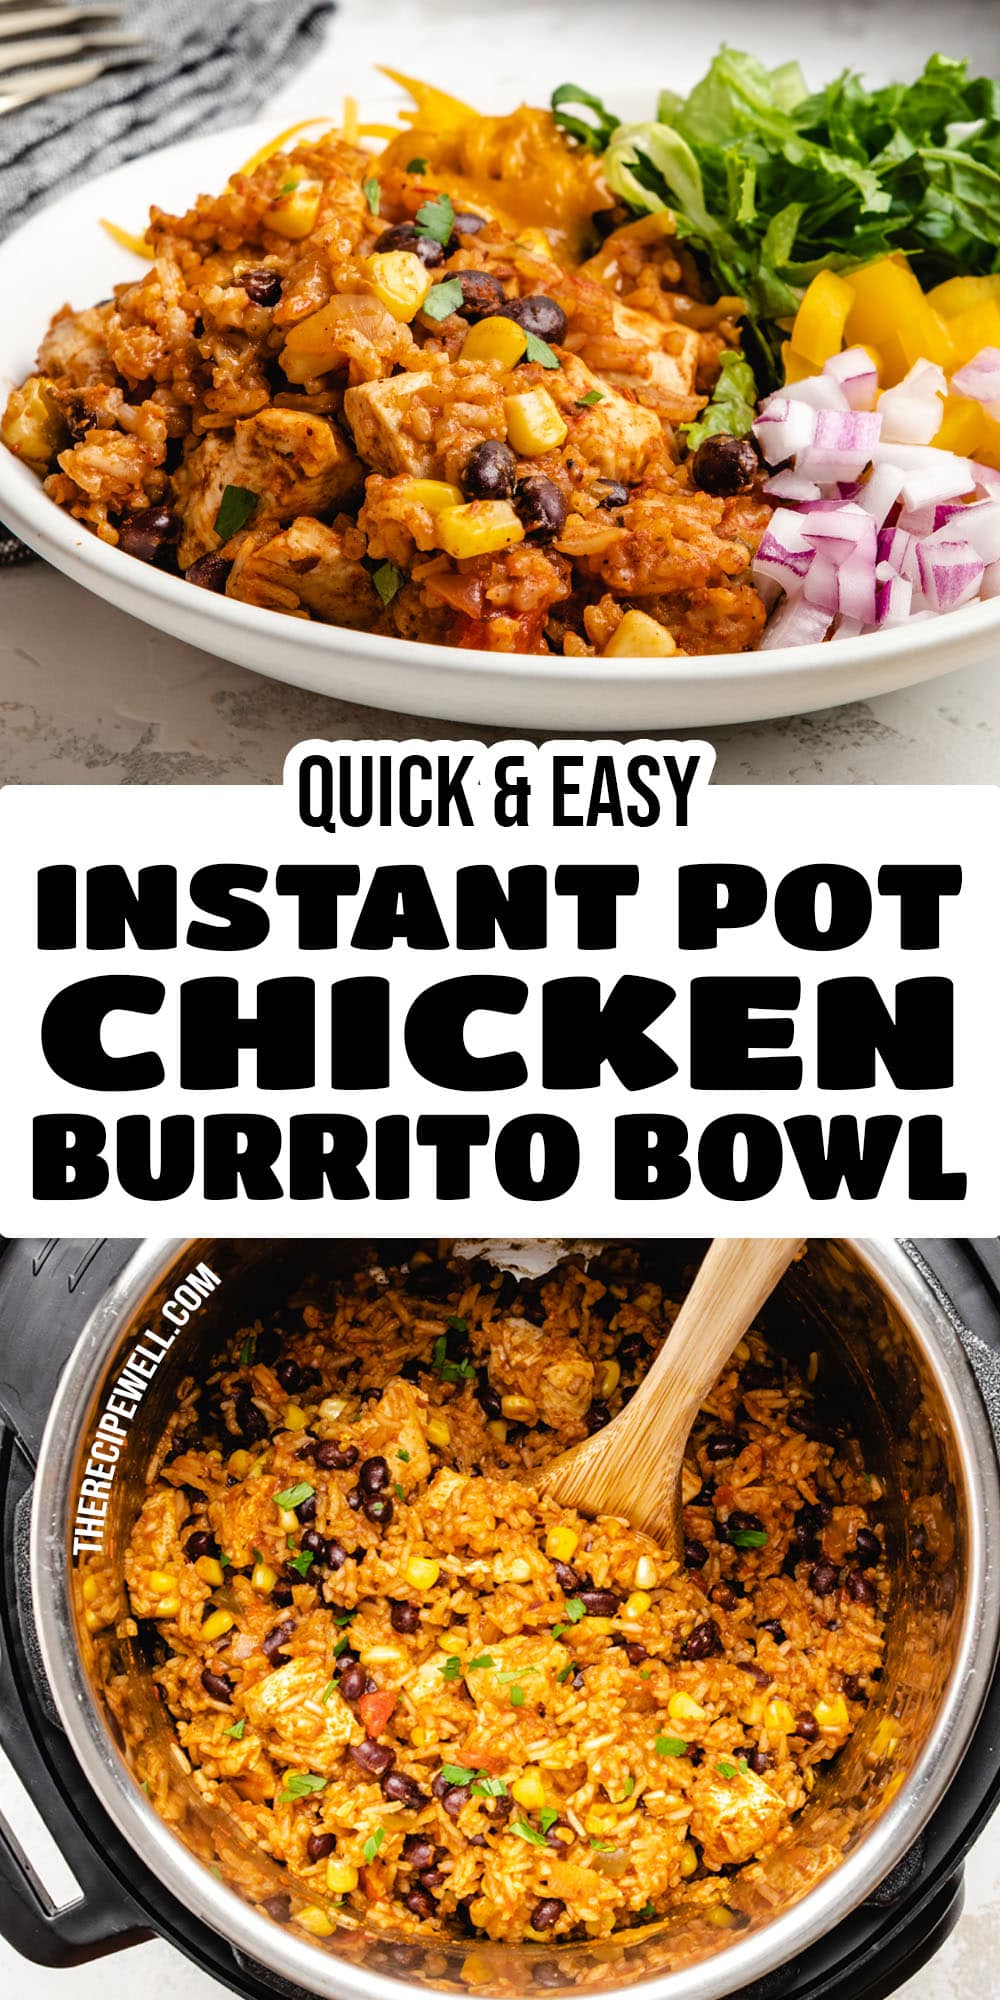 Instant Pot Chicken Burrito Bowls are quick, easy and require just 7 ingredients. Place everything in your Instant Pot and start – no sautéing required! Serve with your favourite fresh garnishes and tortilla chips for a delicious weeknight dinner. via @therecipewell